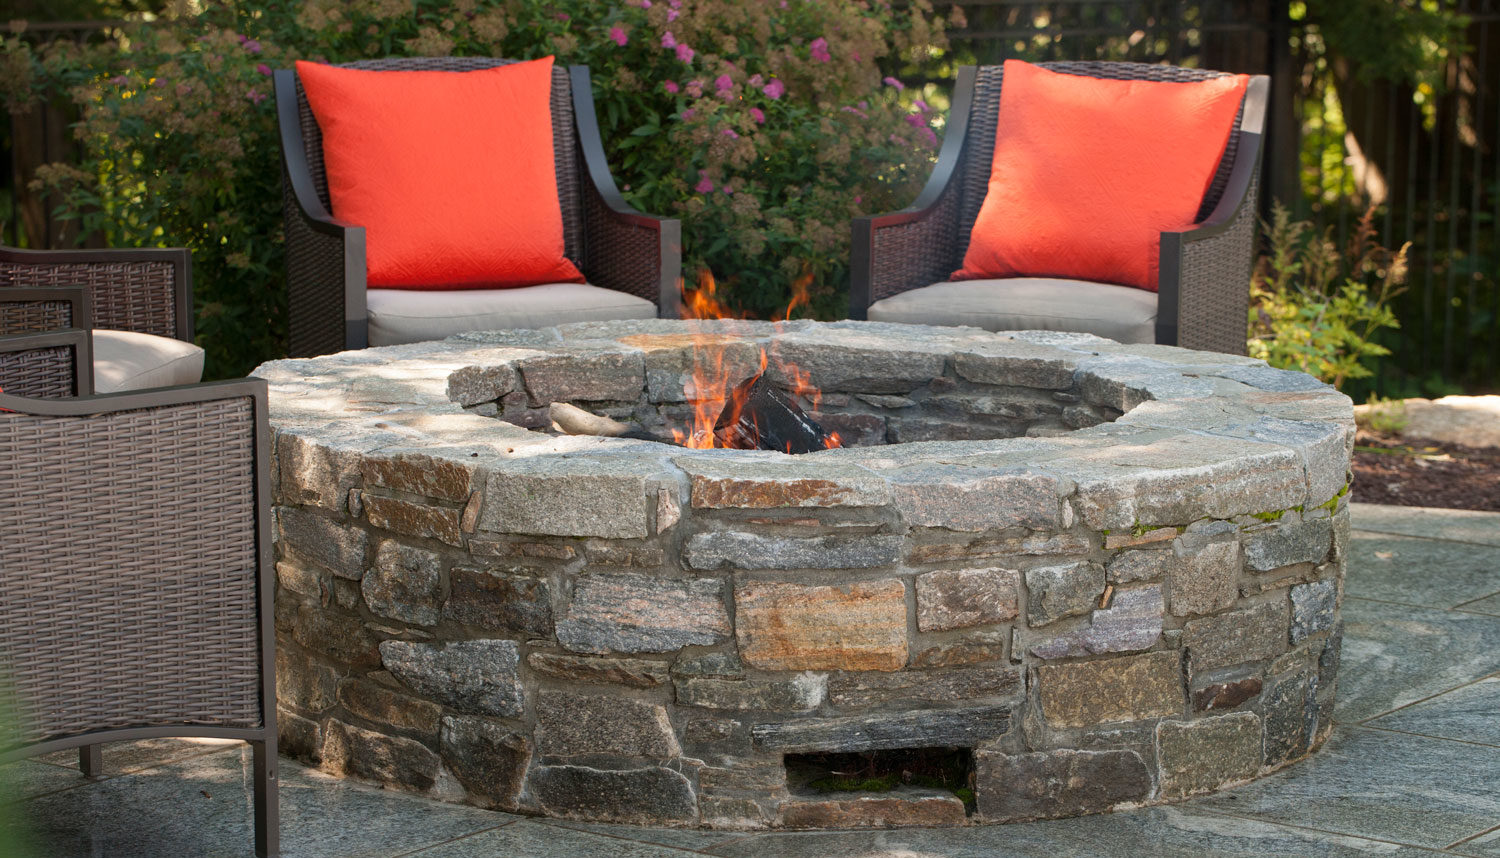 Natural Stone Fire Pit Design, Will A Fire Pit Damage My Porcelain Patio